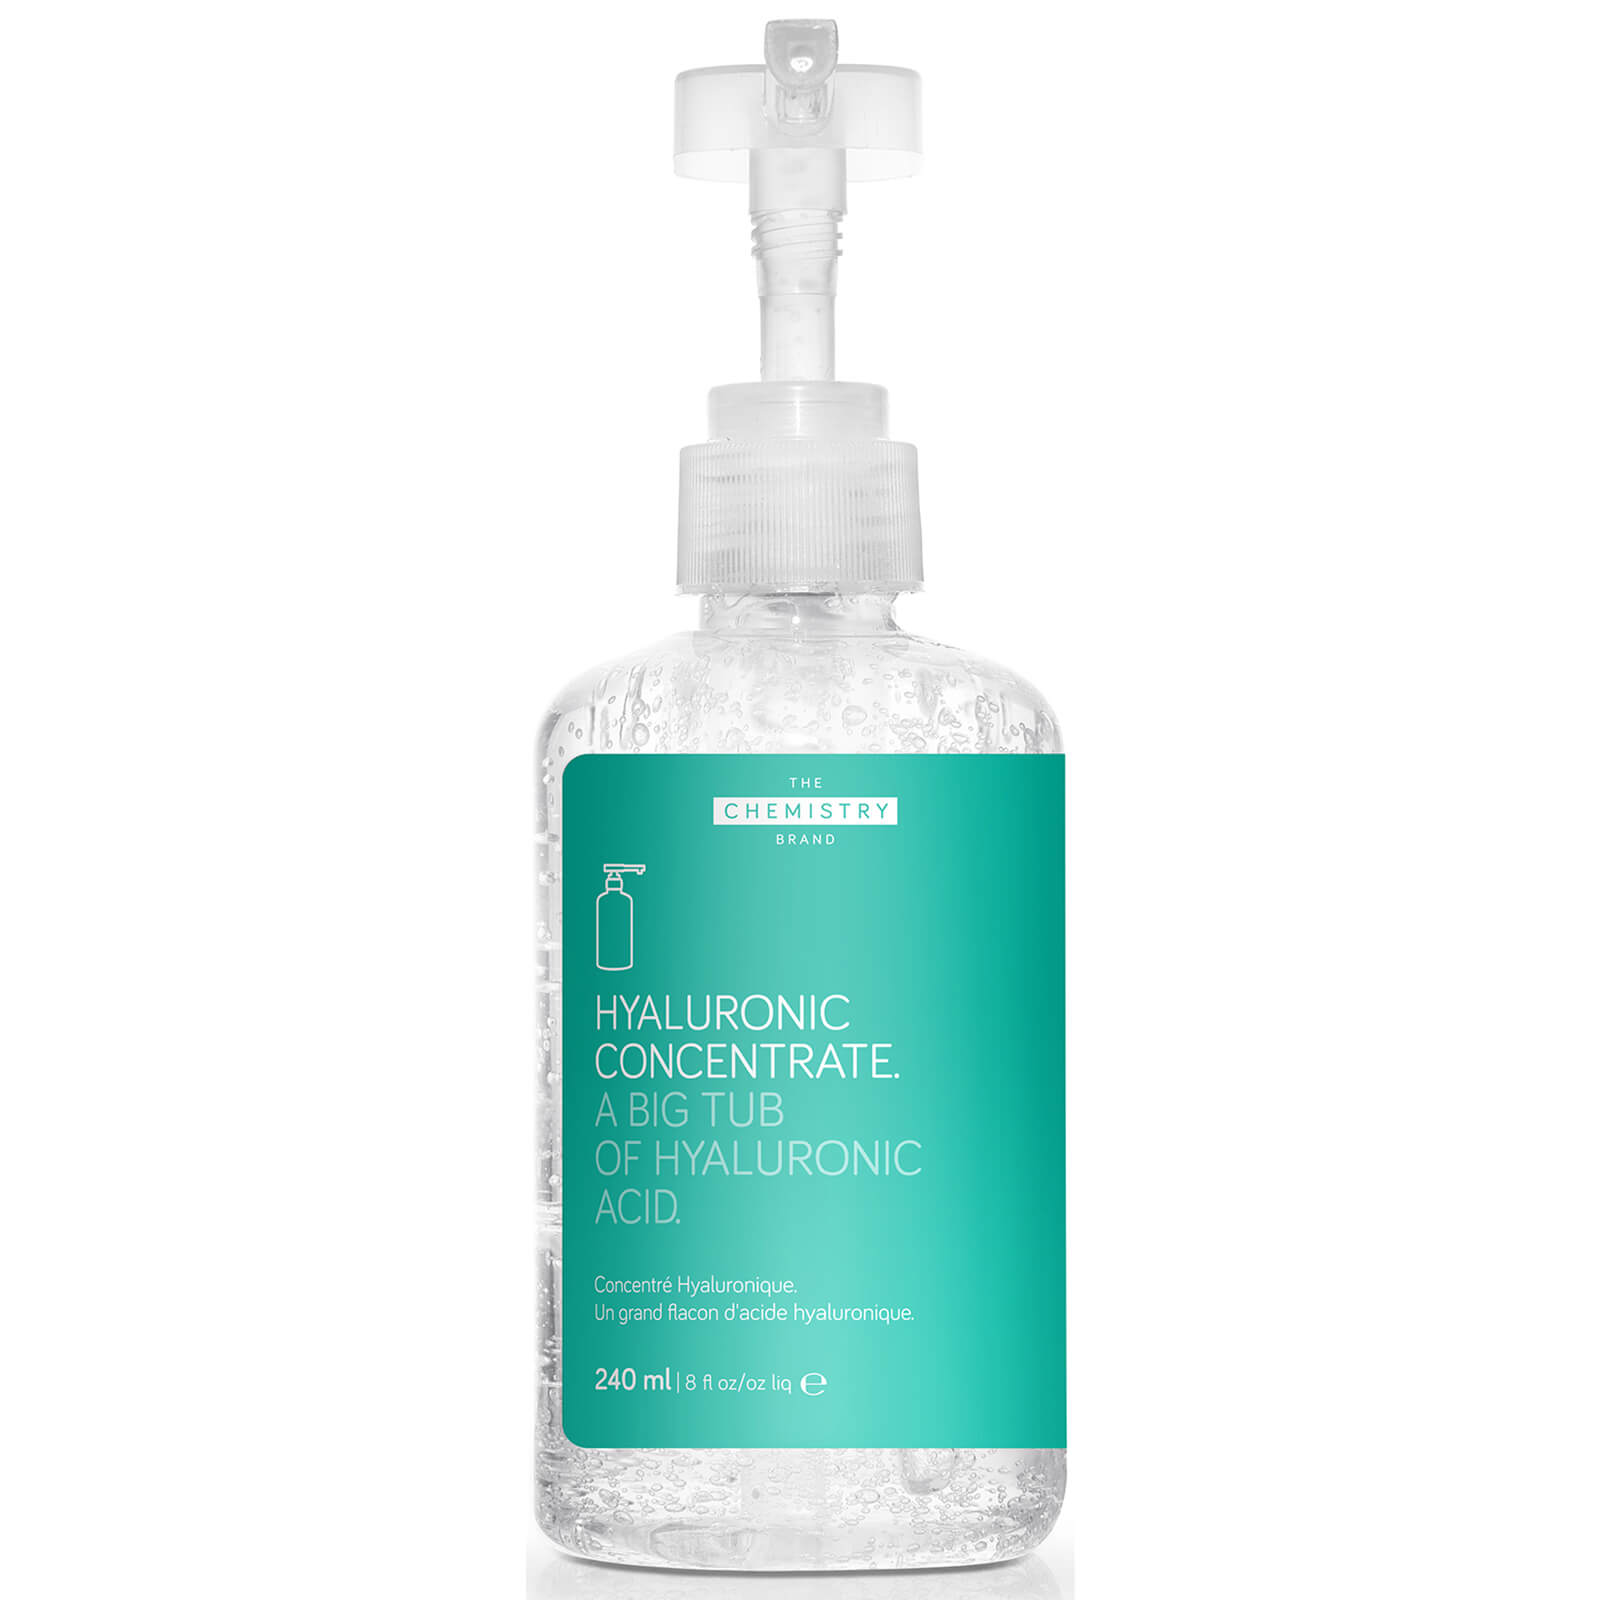 The Chemistry Brand Hyaluronic Concentrate - 240 ml